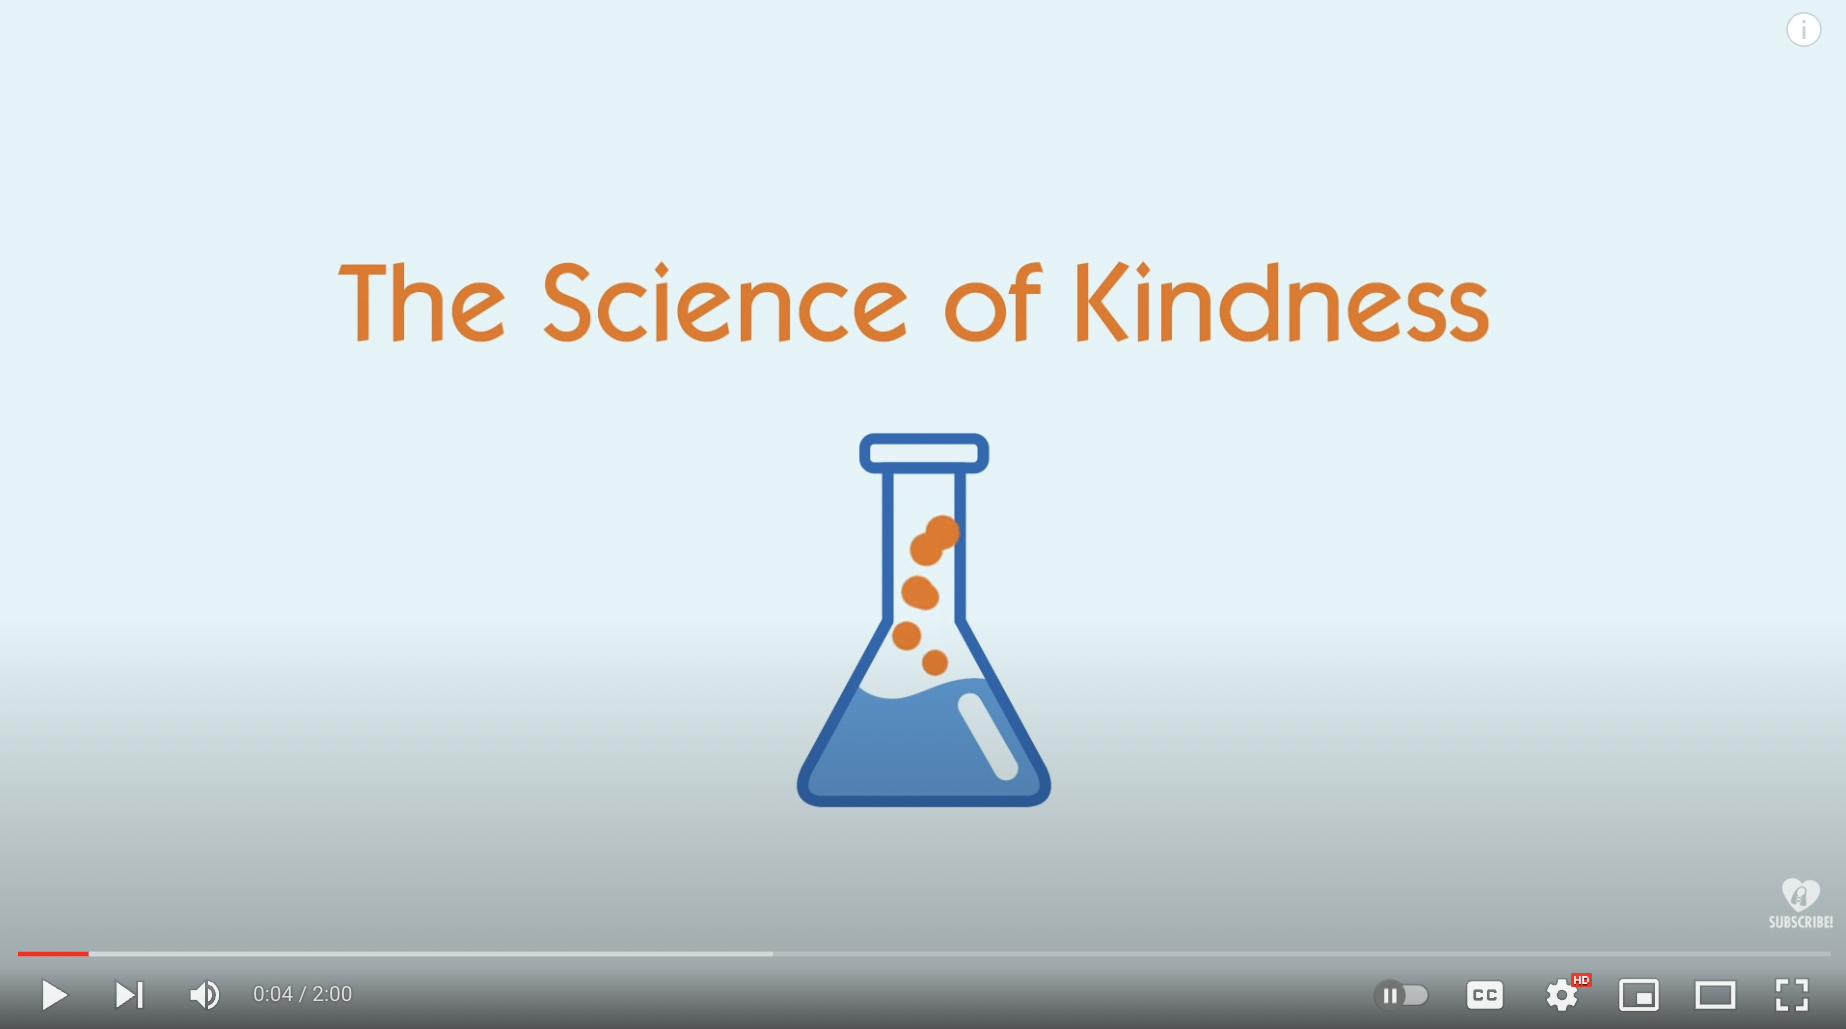 The Science of Kindness text with a beaker under it